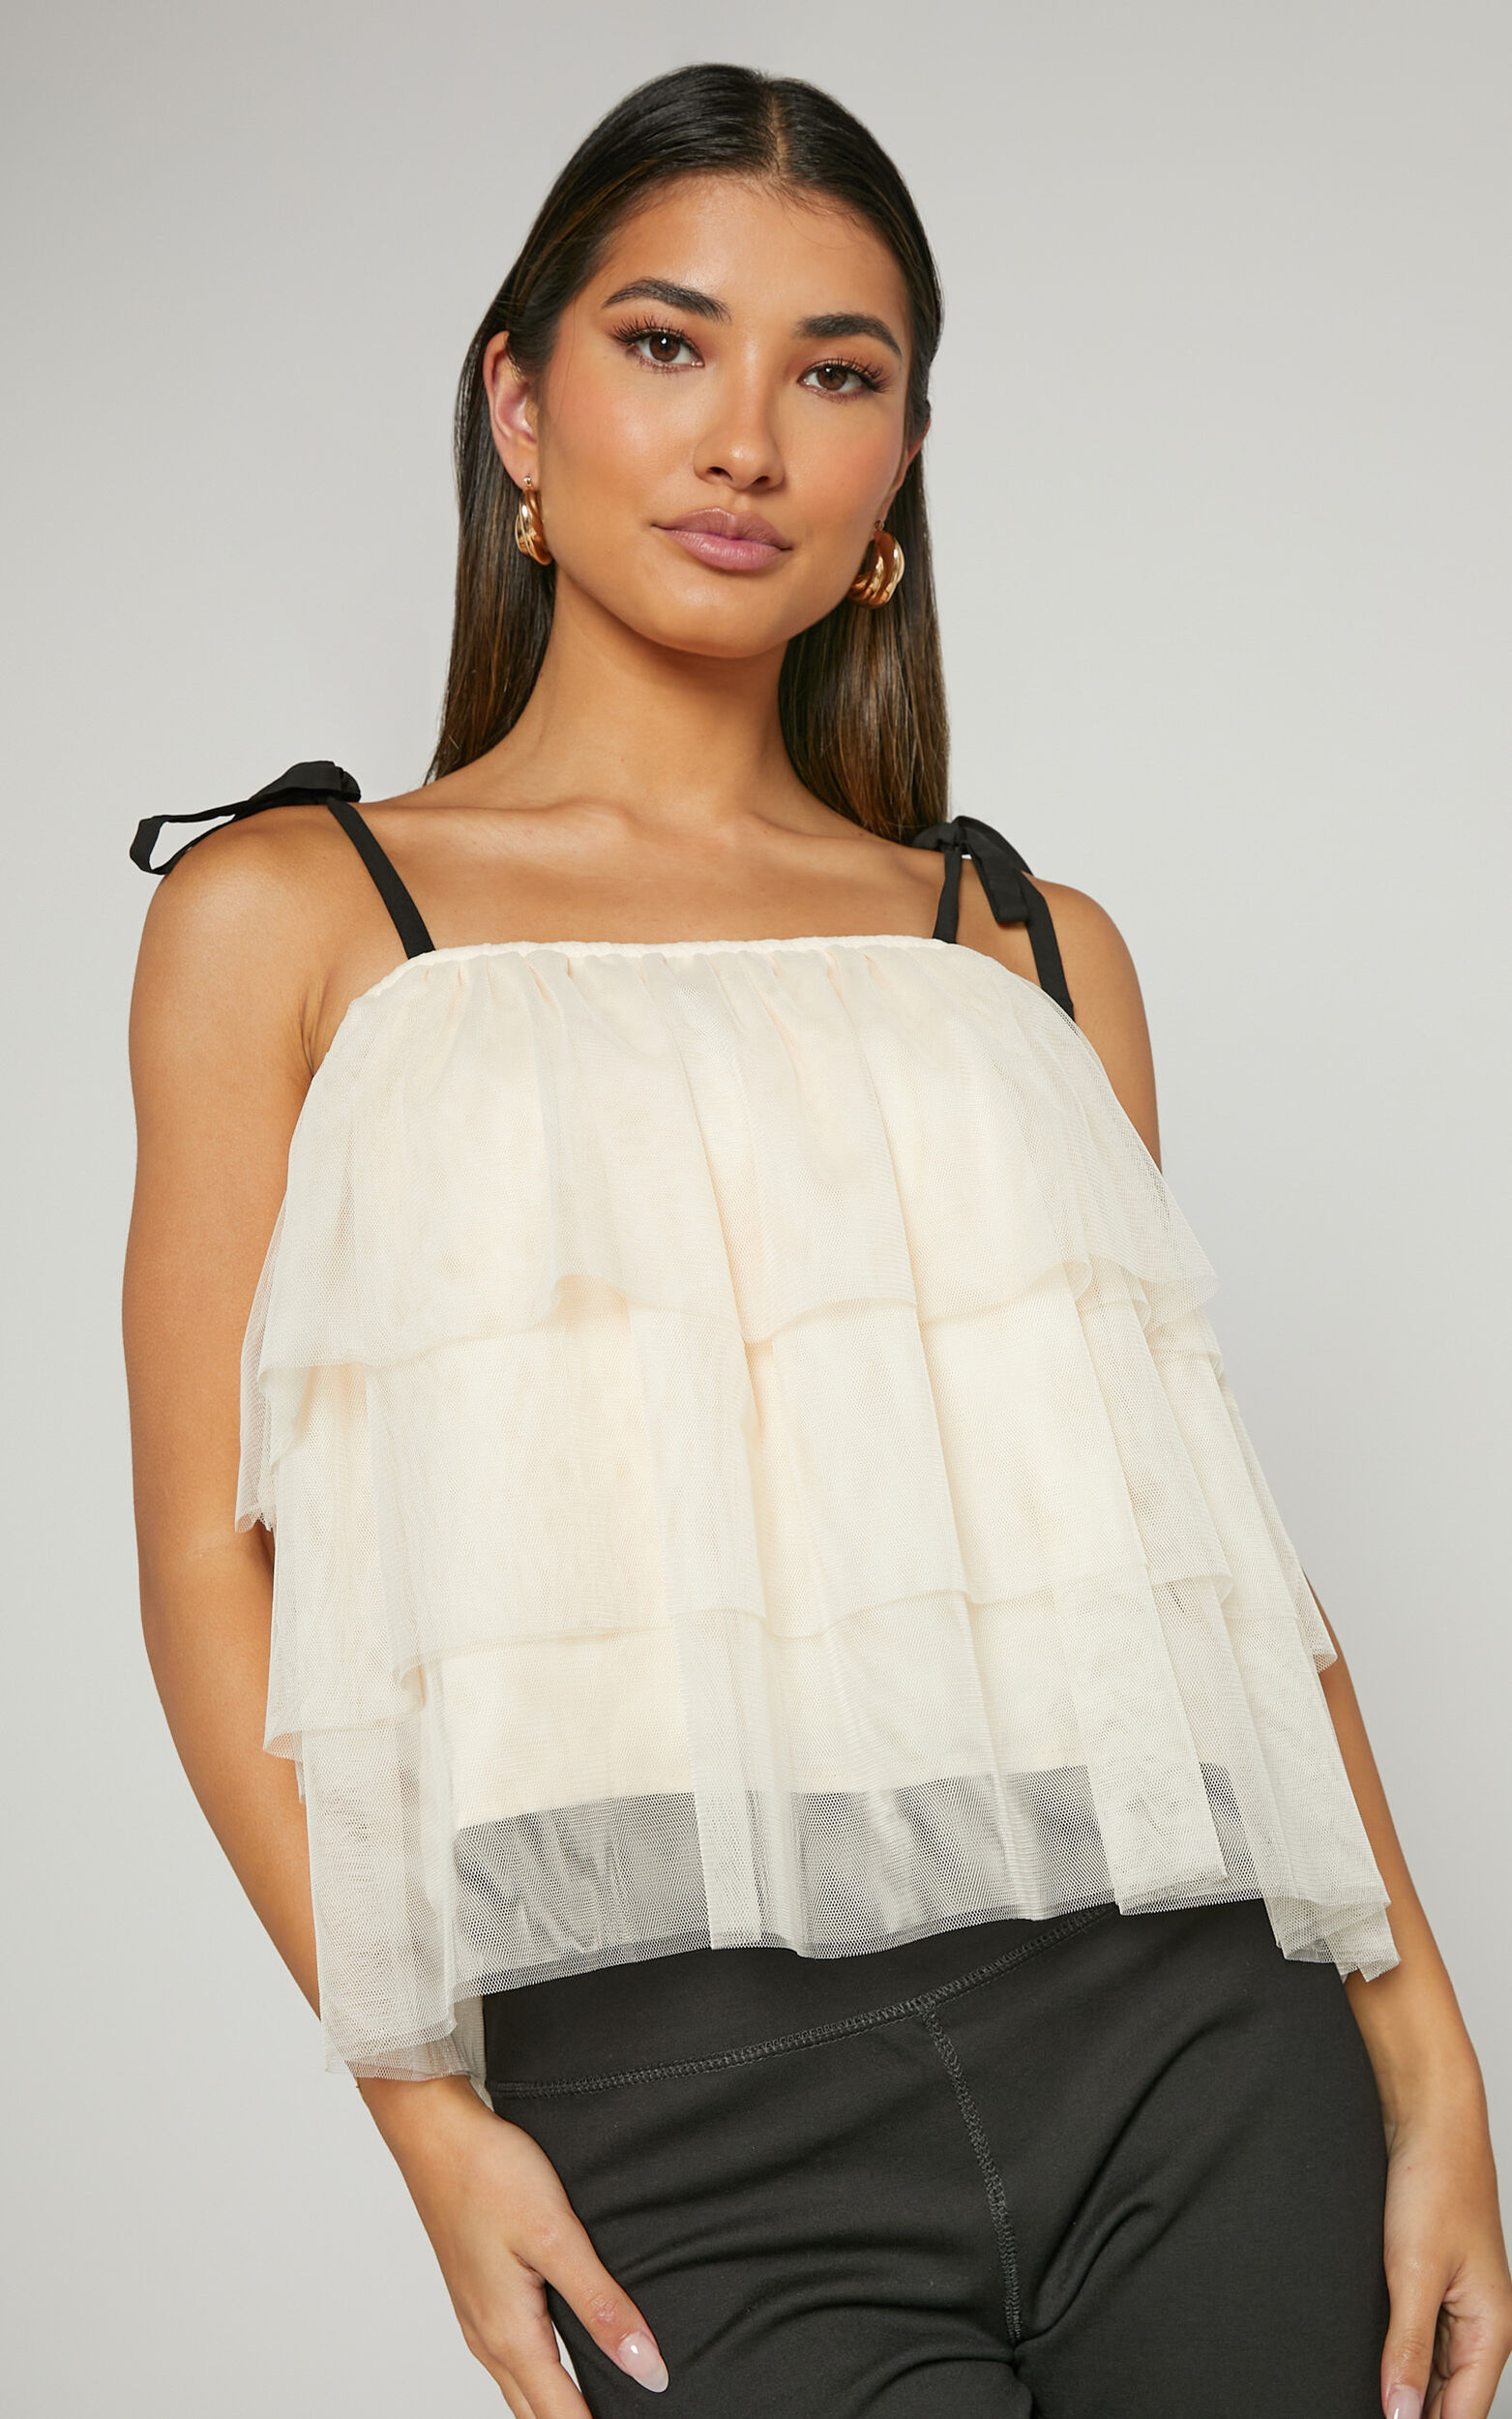 You're a Sweetheart Cream Tie-Strap Ruffled Tank Top